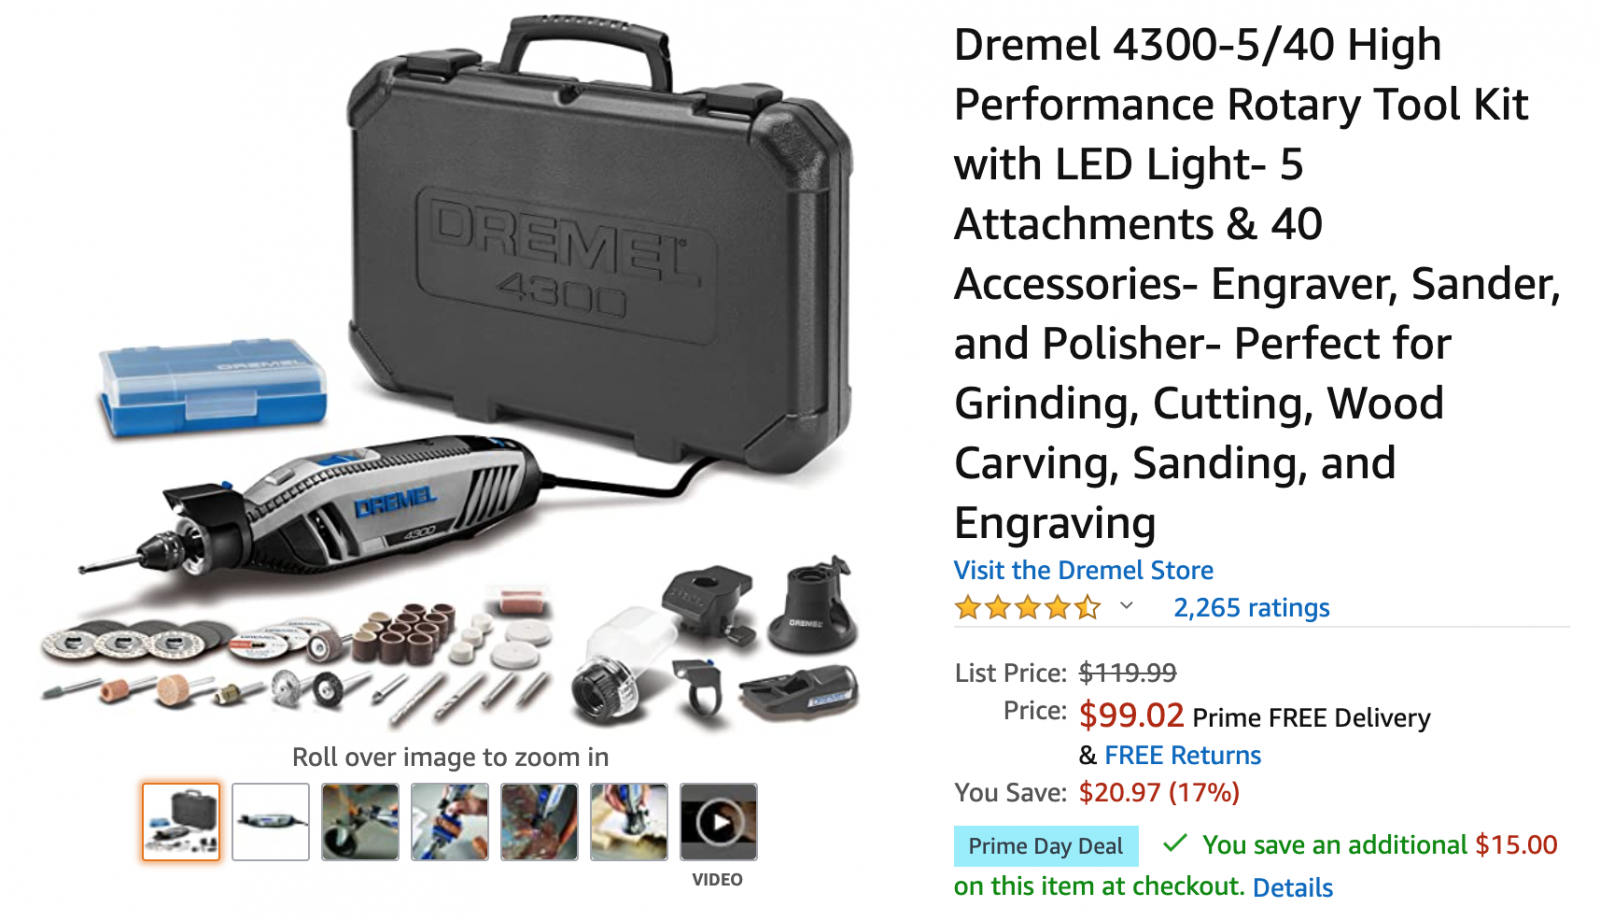 Dremel 4300 Corded High Performance Rotary Tool Kit with Attachments / 40  Accessories